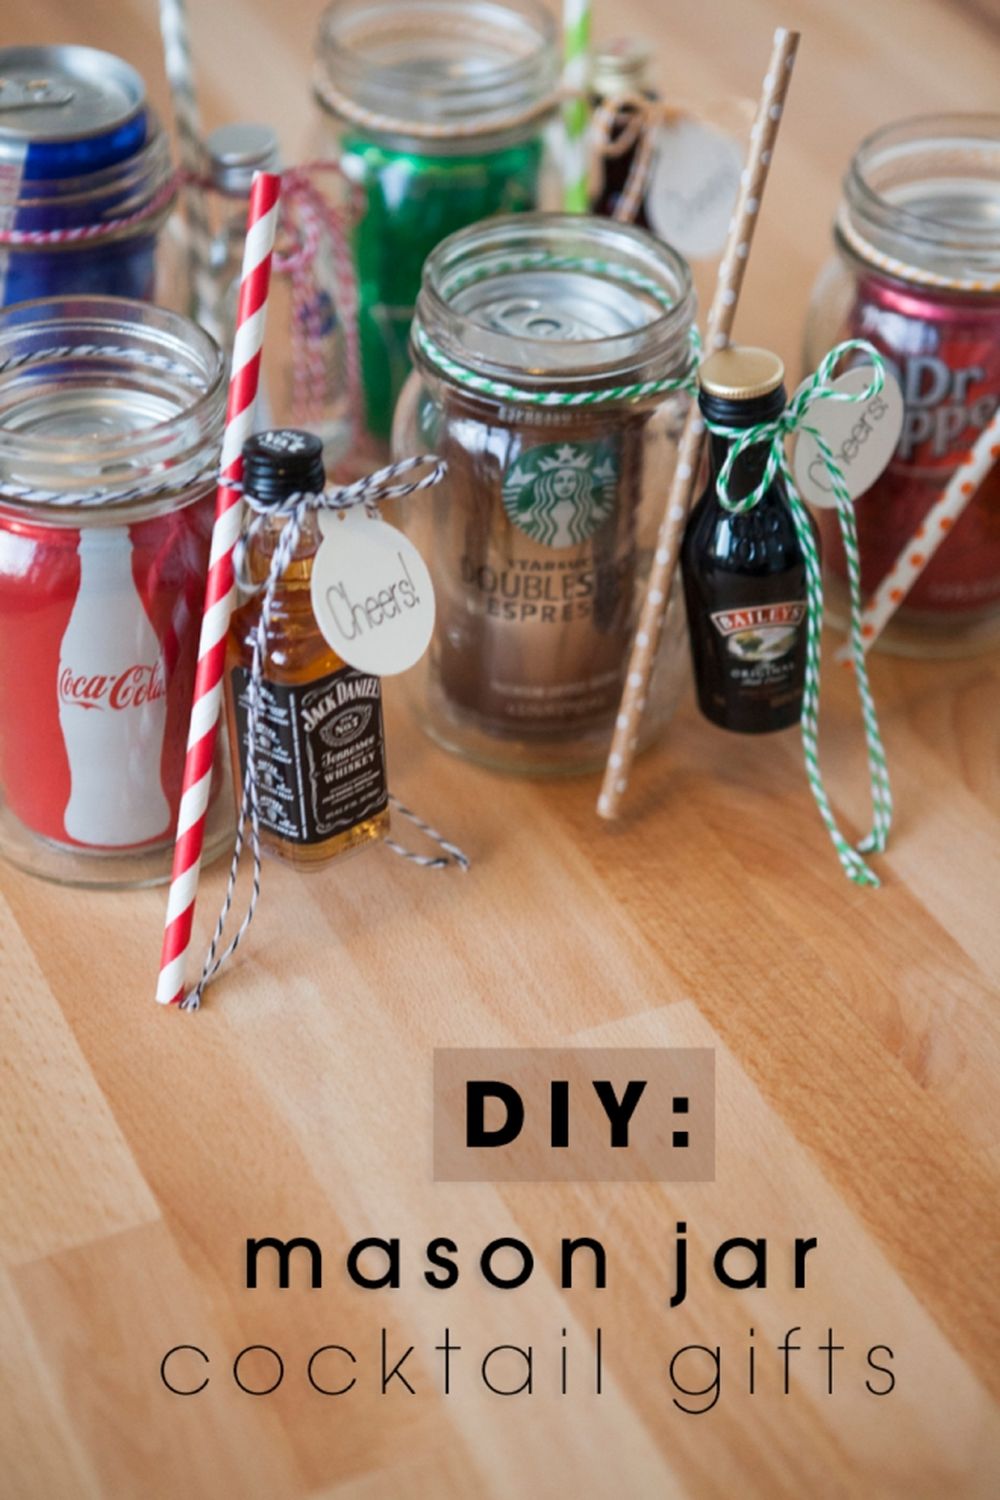 Diy mason jar cocktail gifts what to get your dad for christmas